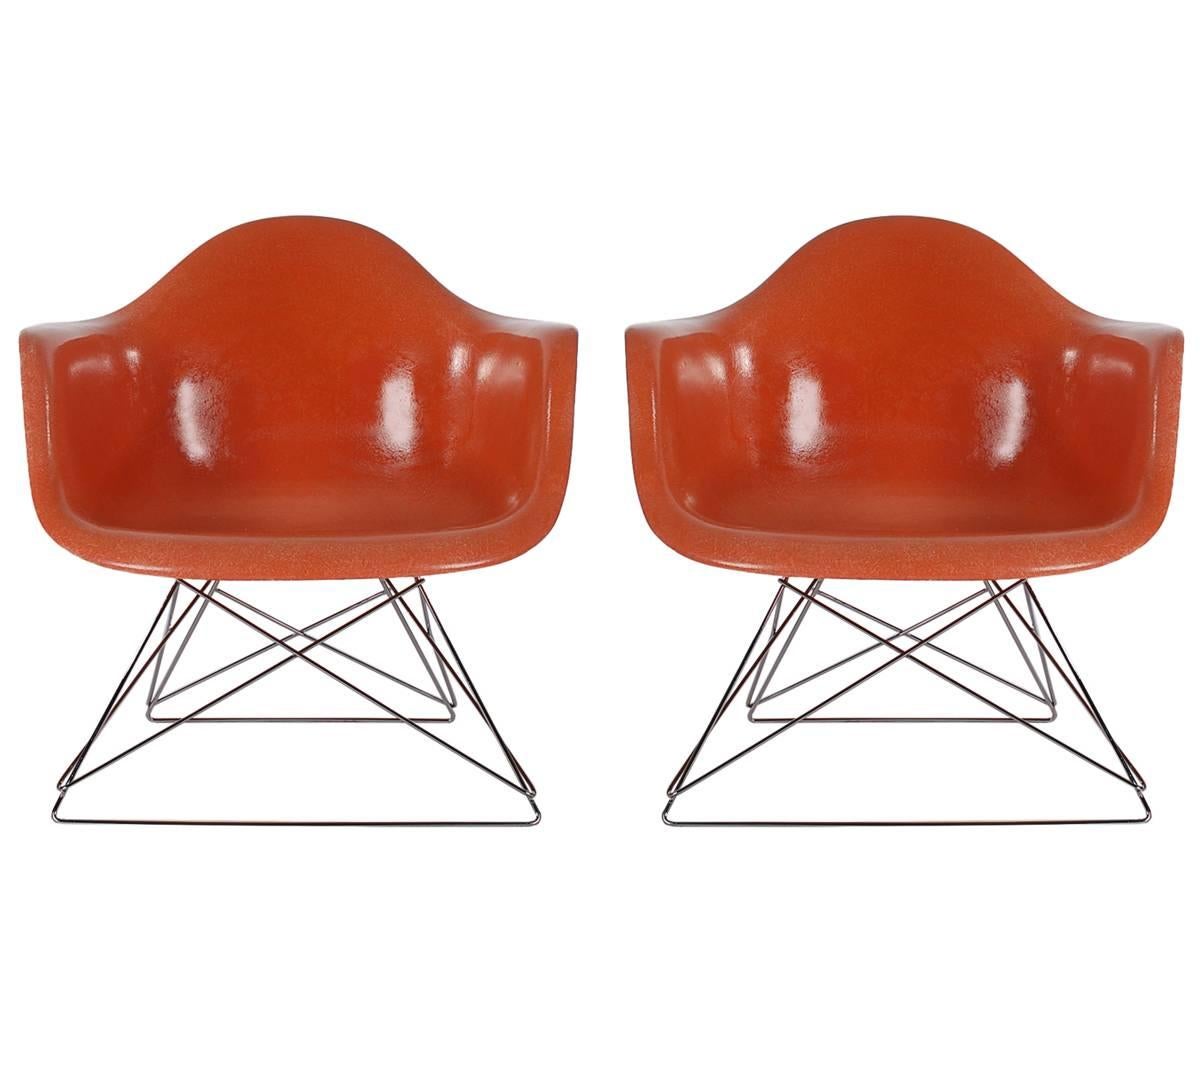 Here we have an iconic design classic from the Mid-Century Modern period. This vintage fiberglass shell chair was designed by Charles Eames and produced by Herman Miller, circa 1972. In a vibrant retro orange color. The chair seats are vintage, and